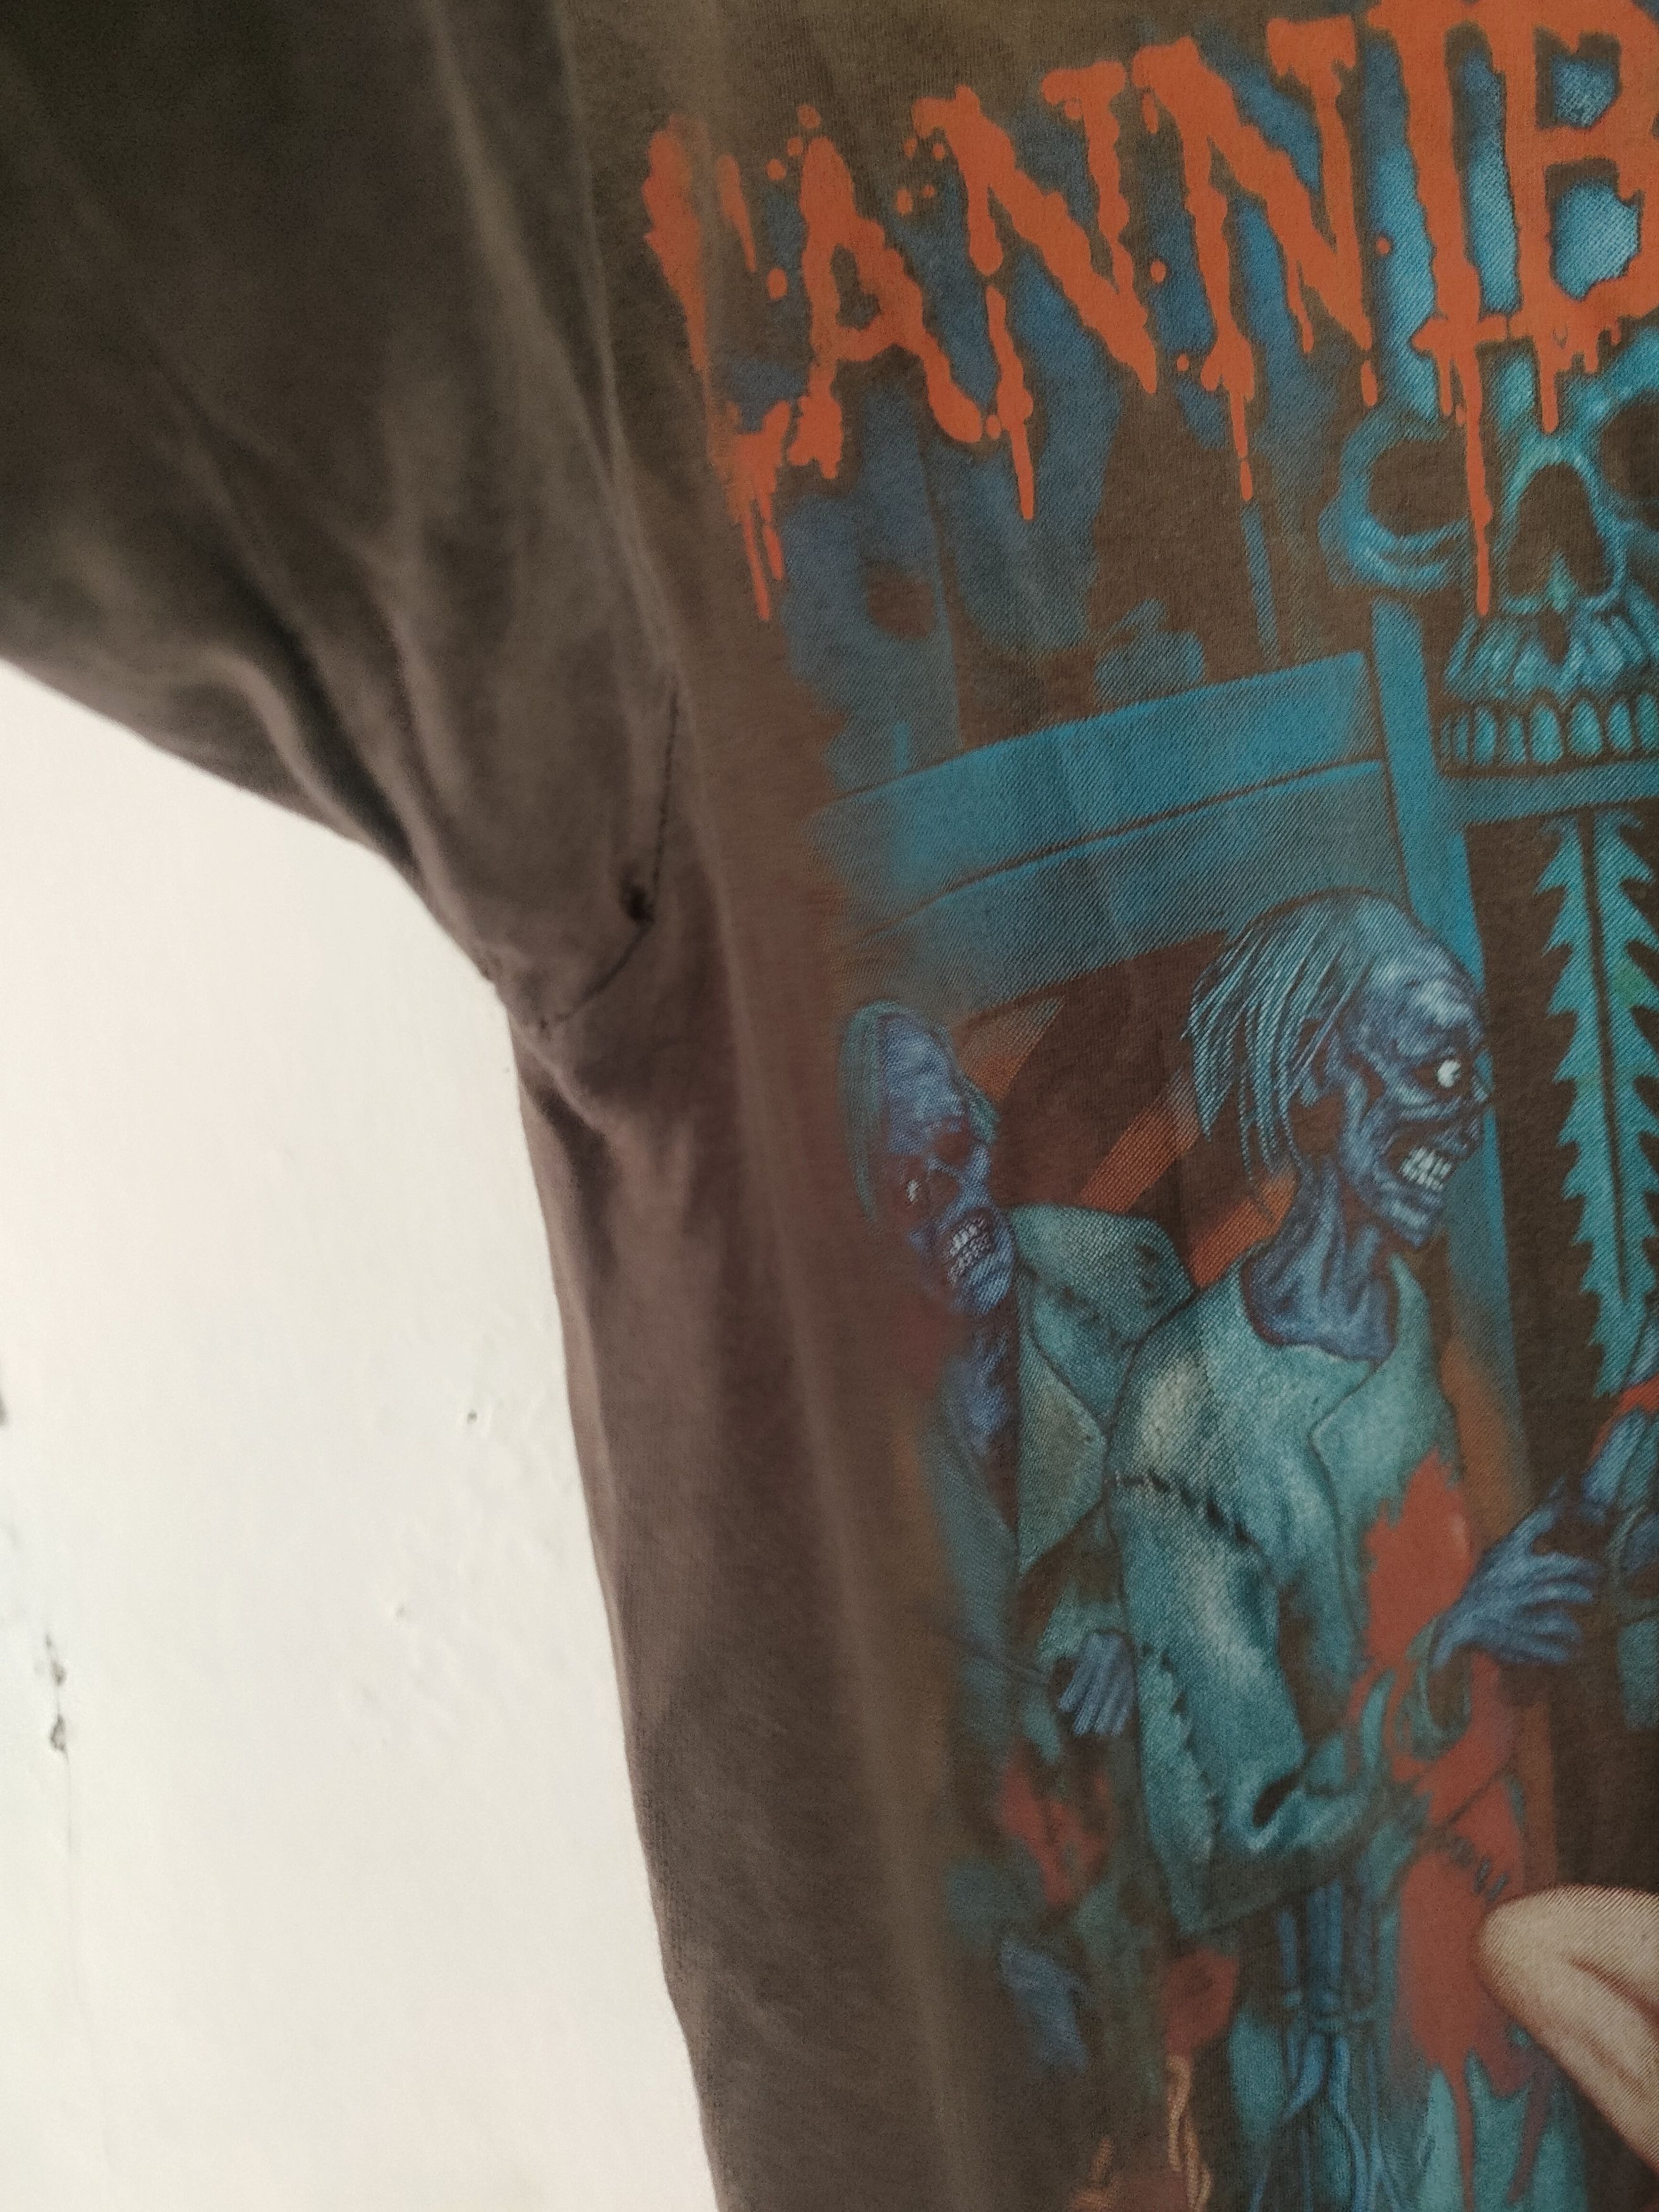 CANNIBAL CORPSE VINTAGE SHIRT THE WRETCHED SPAWN - 8